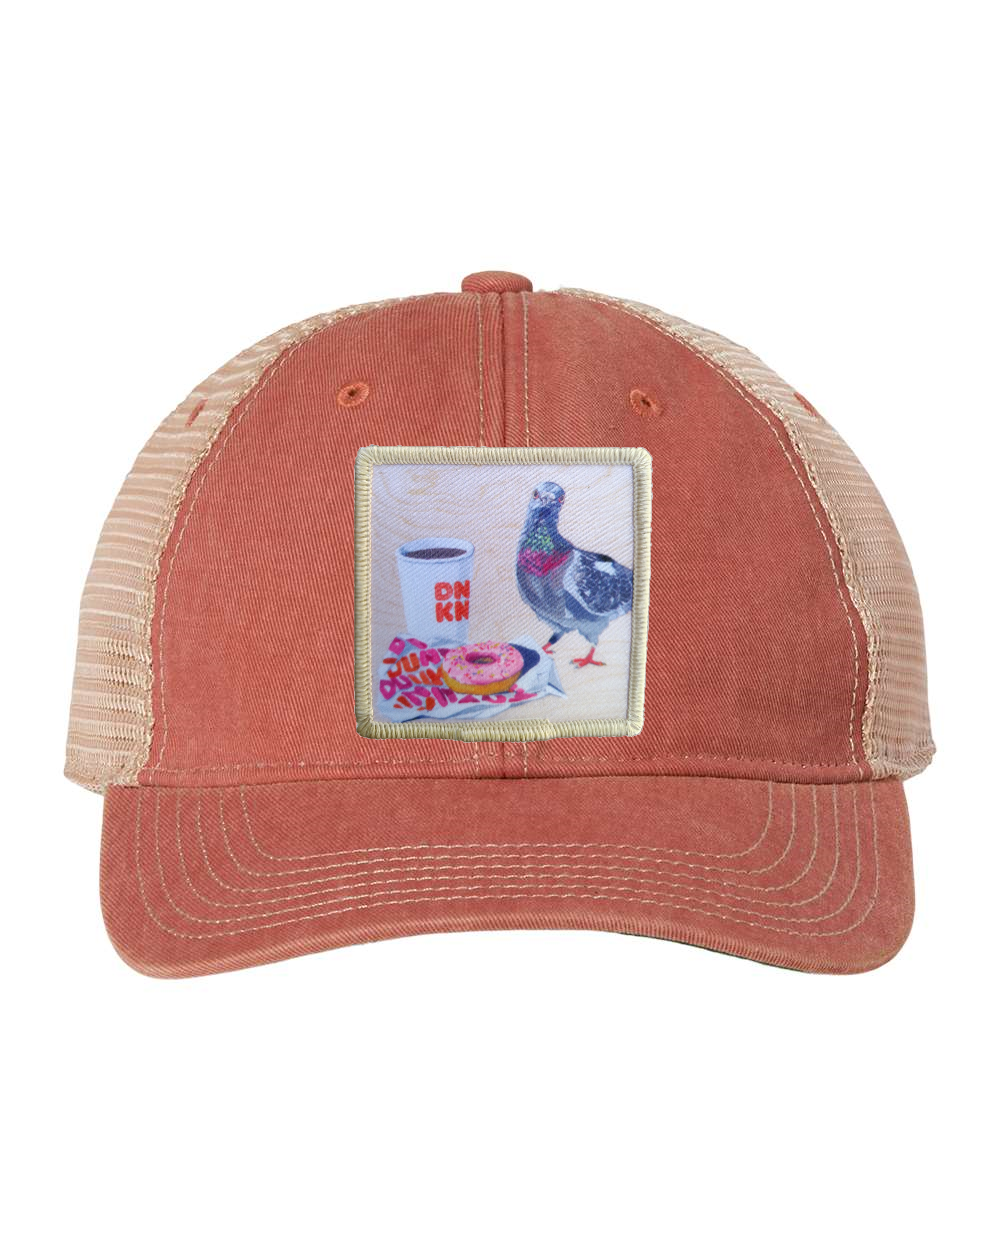 Nantucket Red Unstructured Hats Flyn Costello Pigeons Run On Donuts  